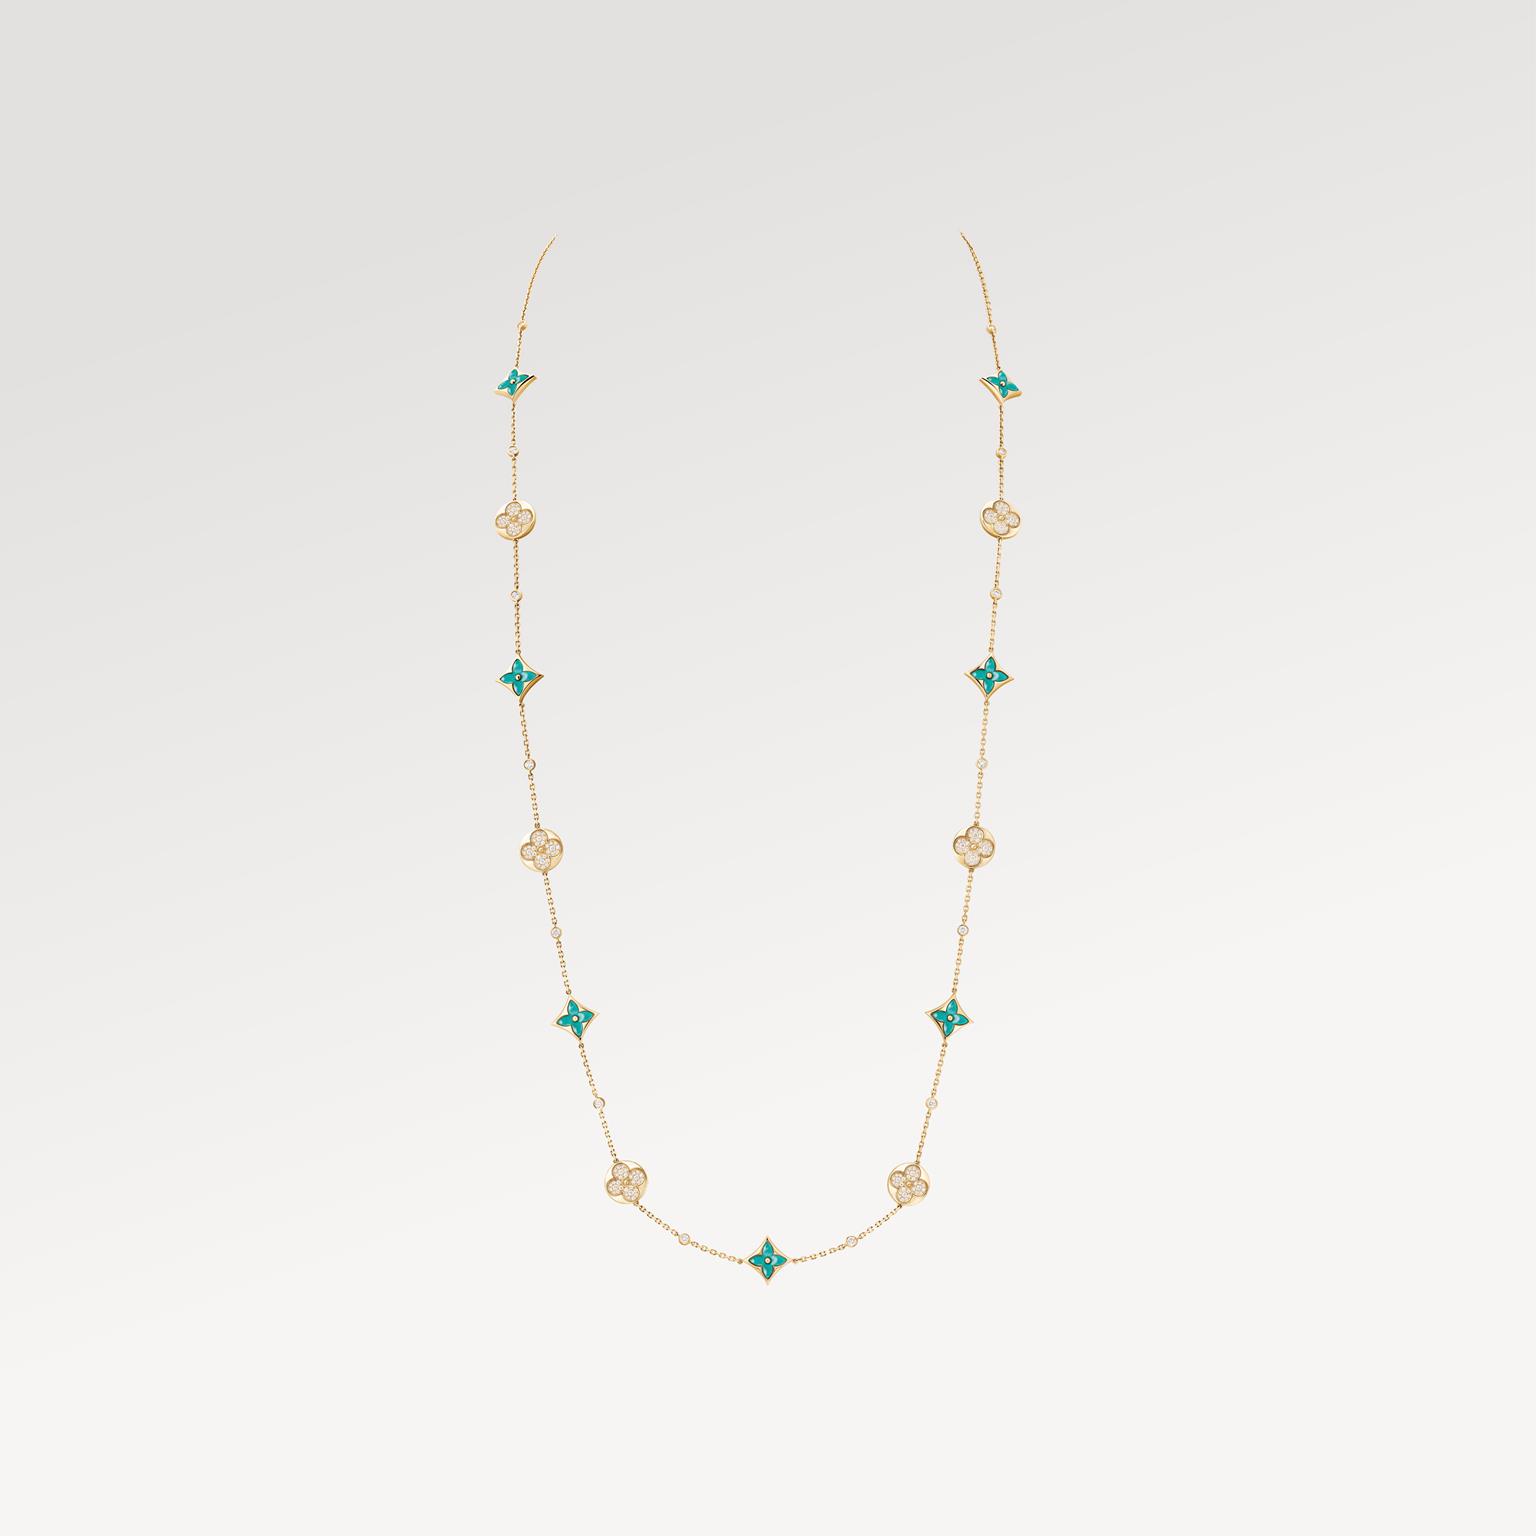 LOUIS VUITTON JEWELRY - COLOR BLOSSOM AMAZONITE SAUTOIR IN YELLOW GOLD AND DIAMONDS